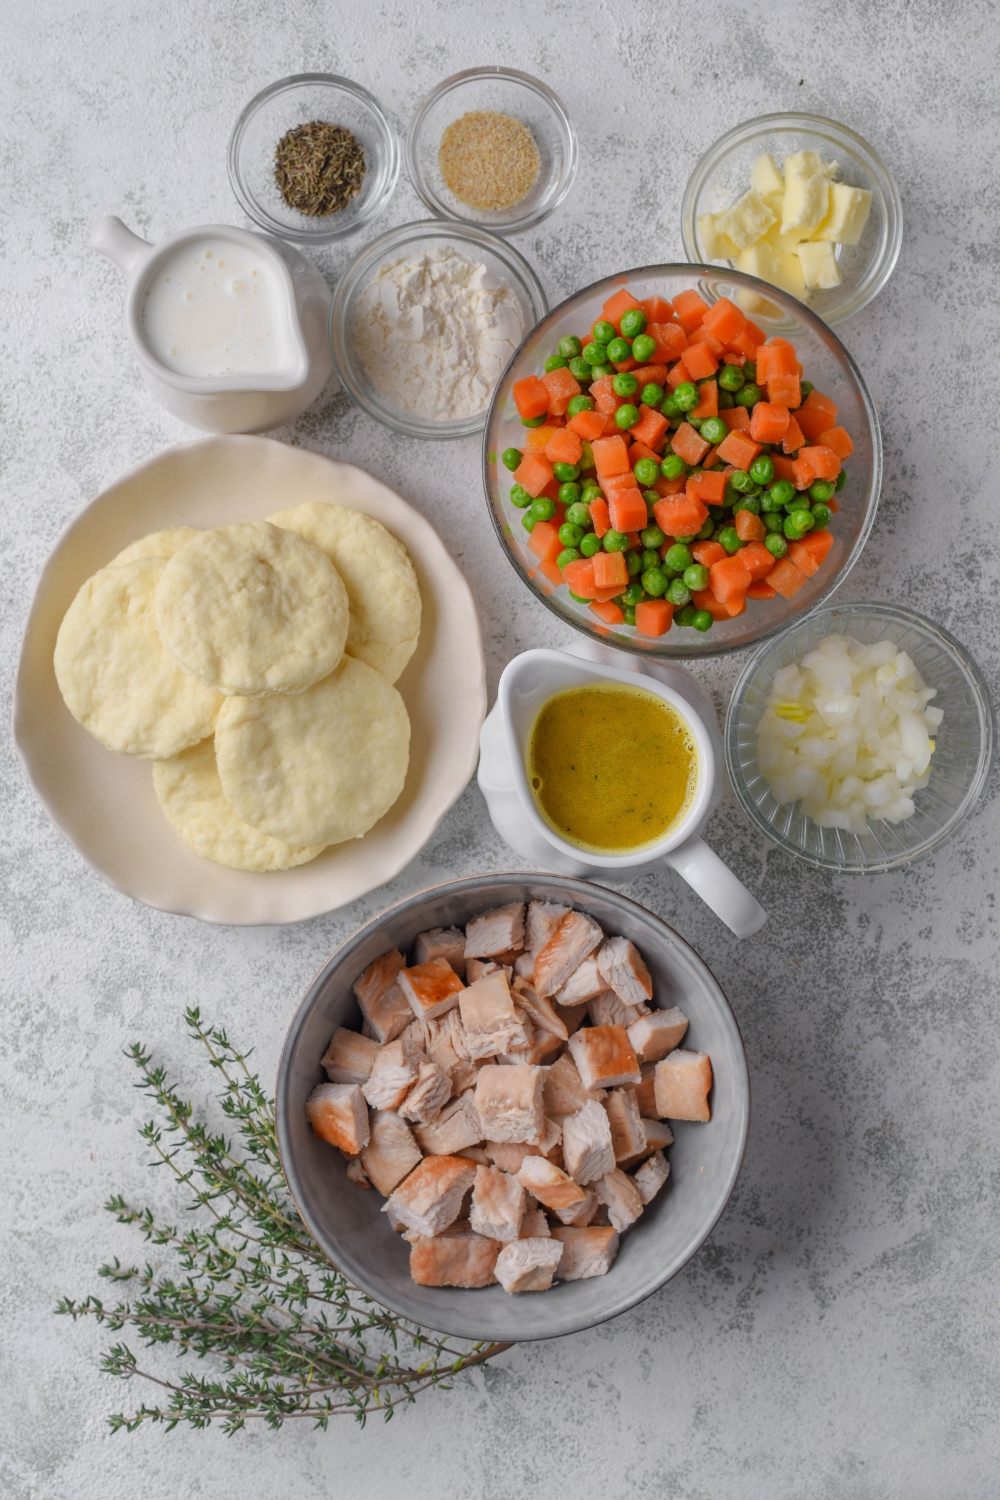 A bowl of chopped turkey, a pitcher of vegetable broth, a bowl of chopped onions, a bowl of biscuits, a bowl of carrots and peas, a bowl of flour, a bowl of butter, a bowl of seasoning, and a pitcher of milk all on a grey counter.